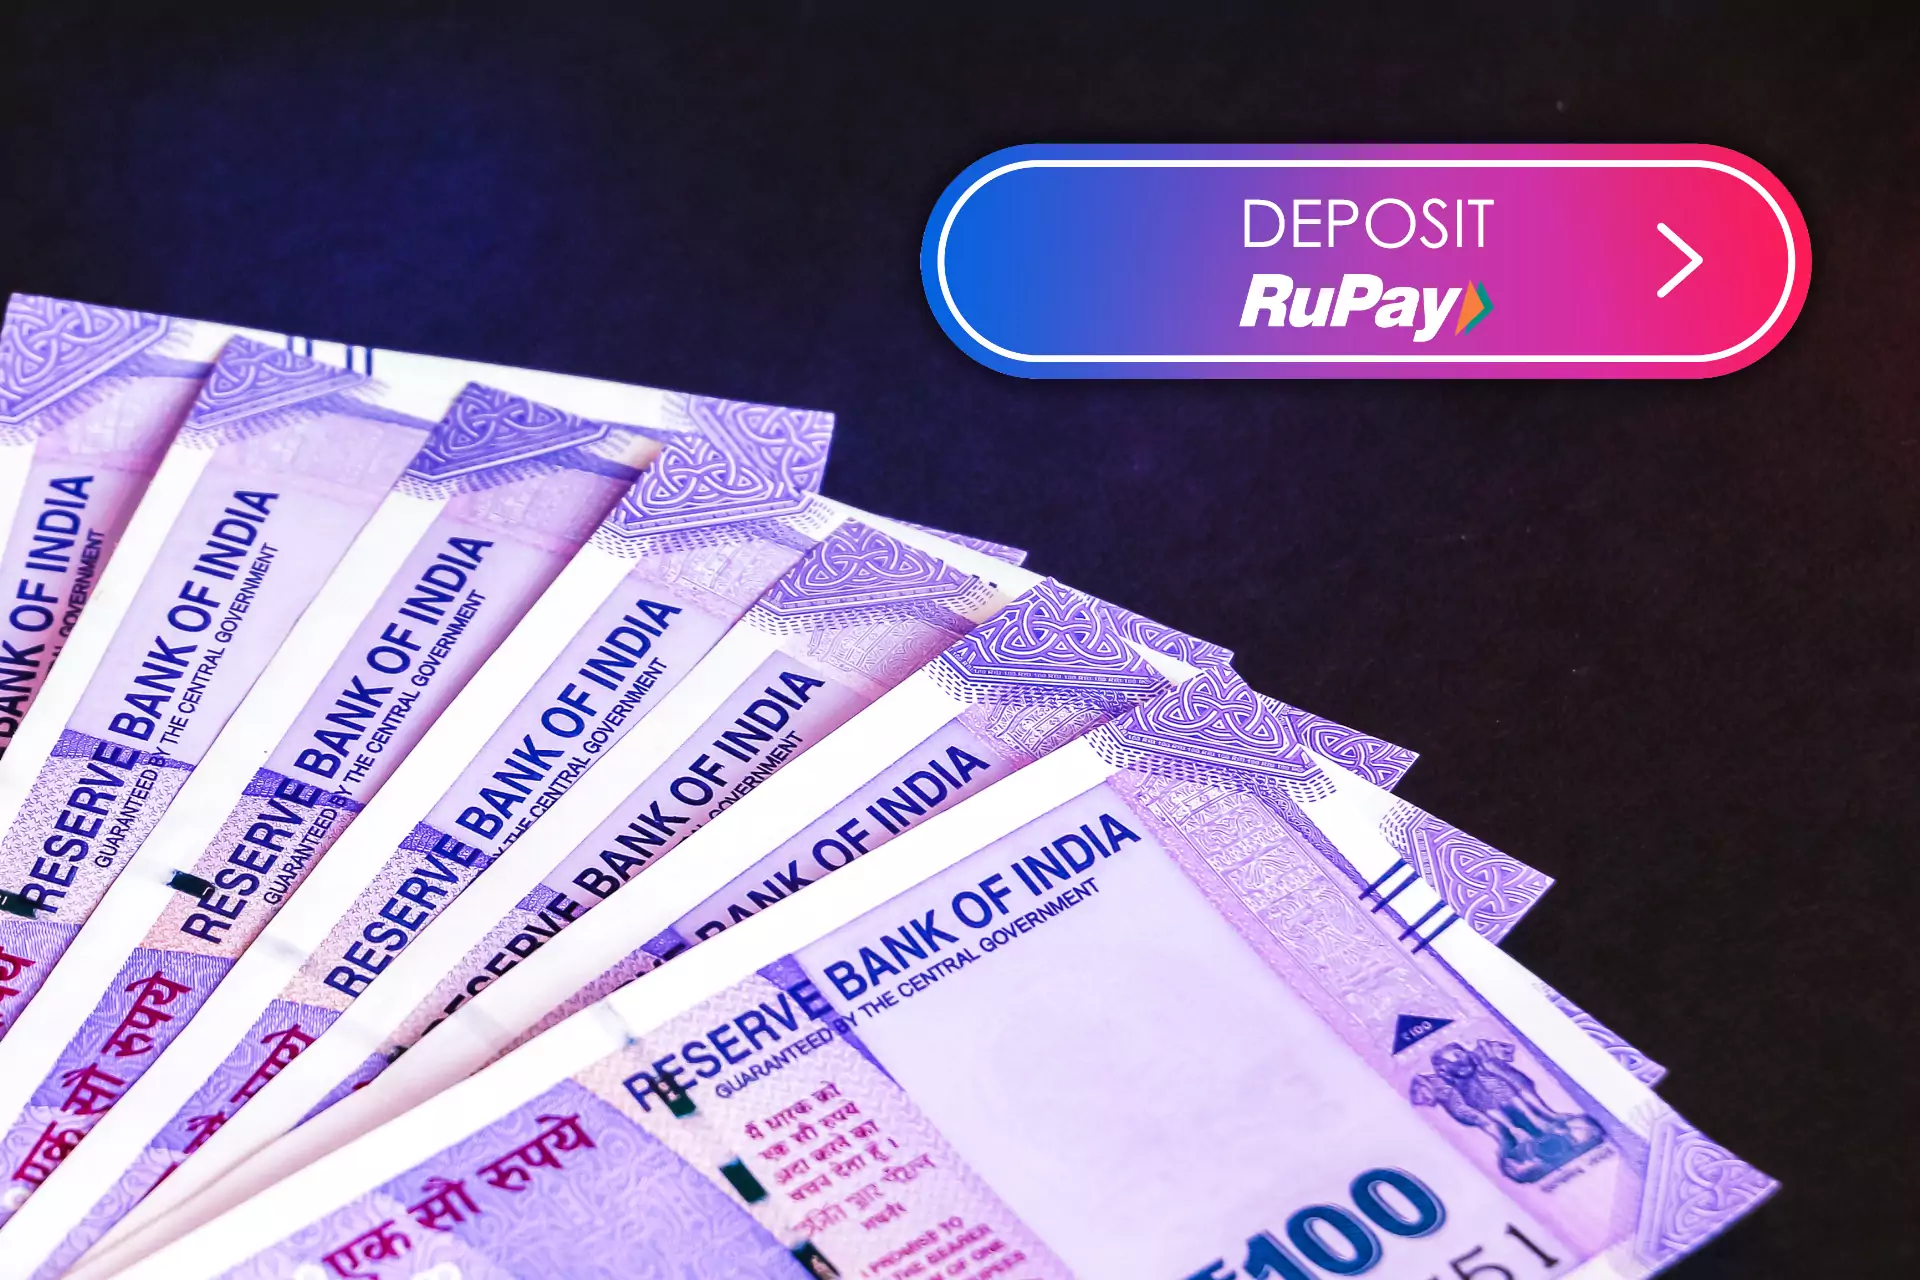 Rupay is a quite popular payment system in India, so lots of casinos accept these payments.